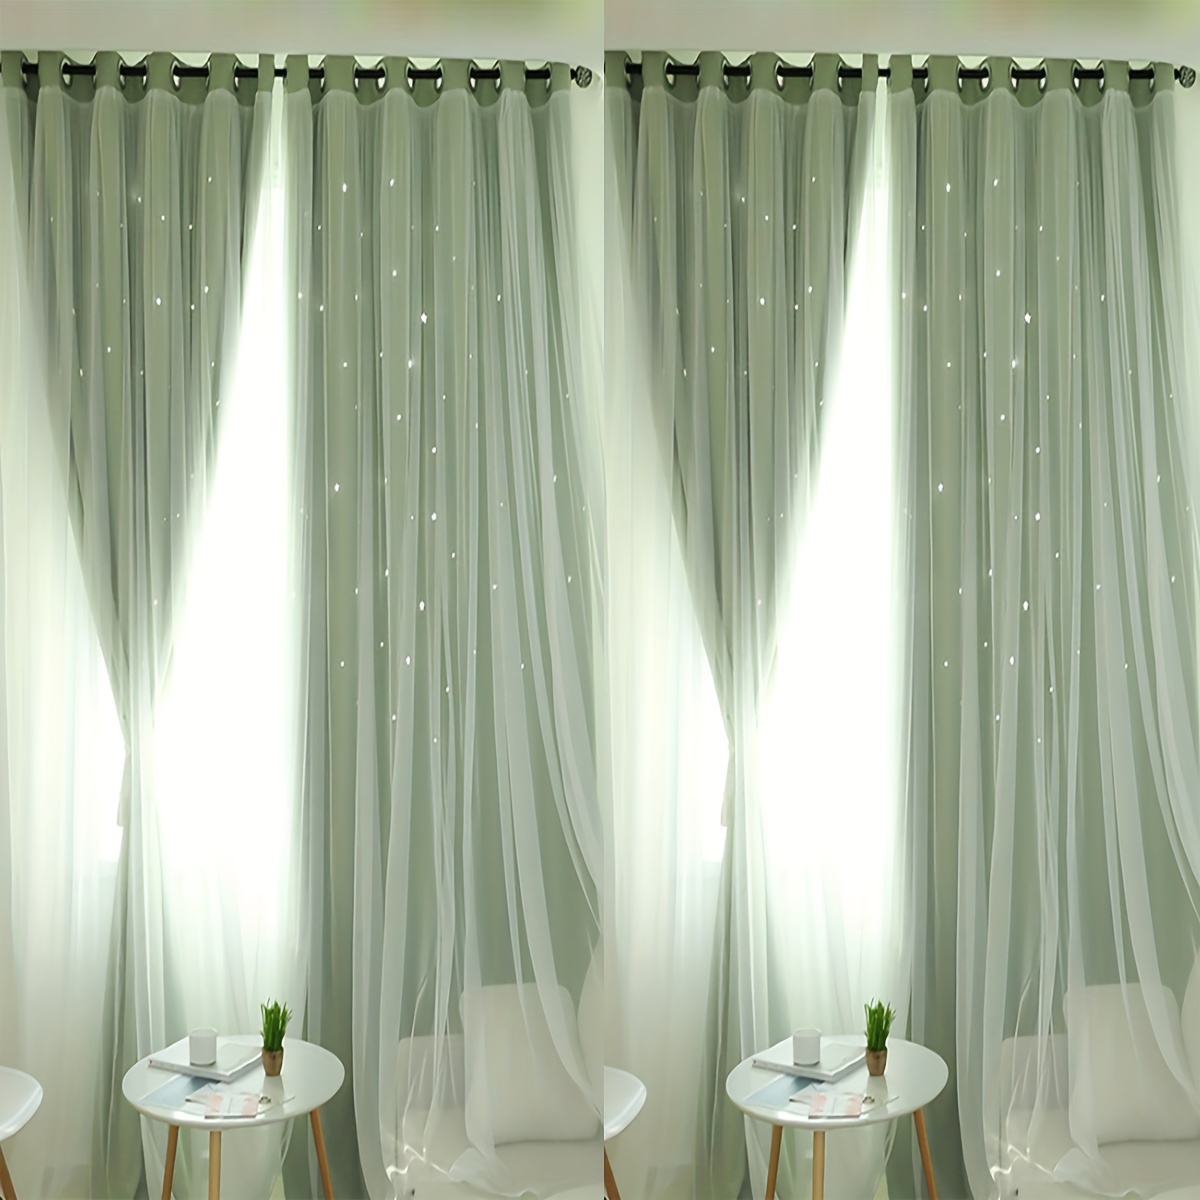 

4 Panels Romantic Curtain, Hollow-out Stars Window Curtain, Double Layer Blackout Curtains For Bedroom Liveing Room (w39" X L78.7")